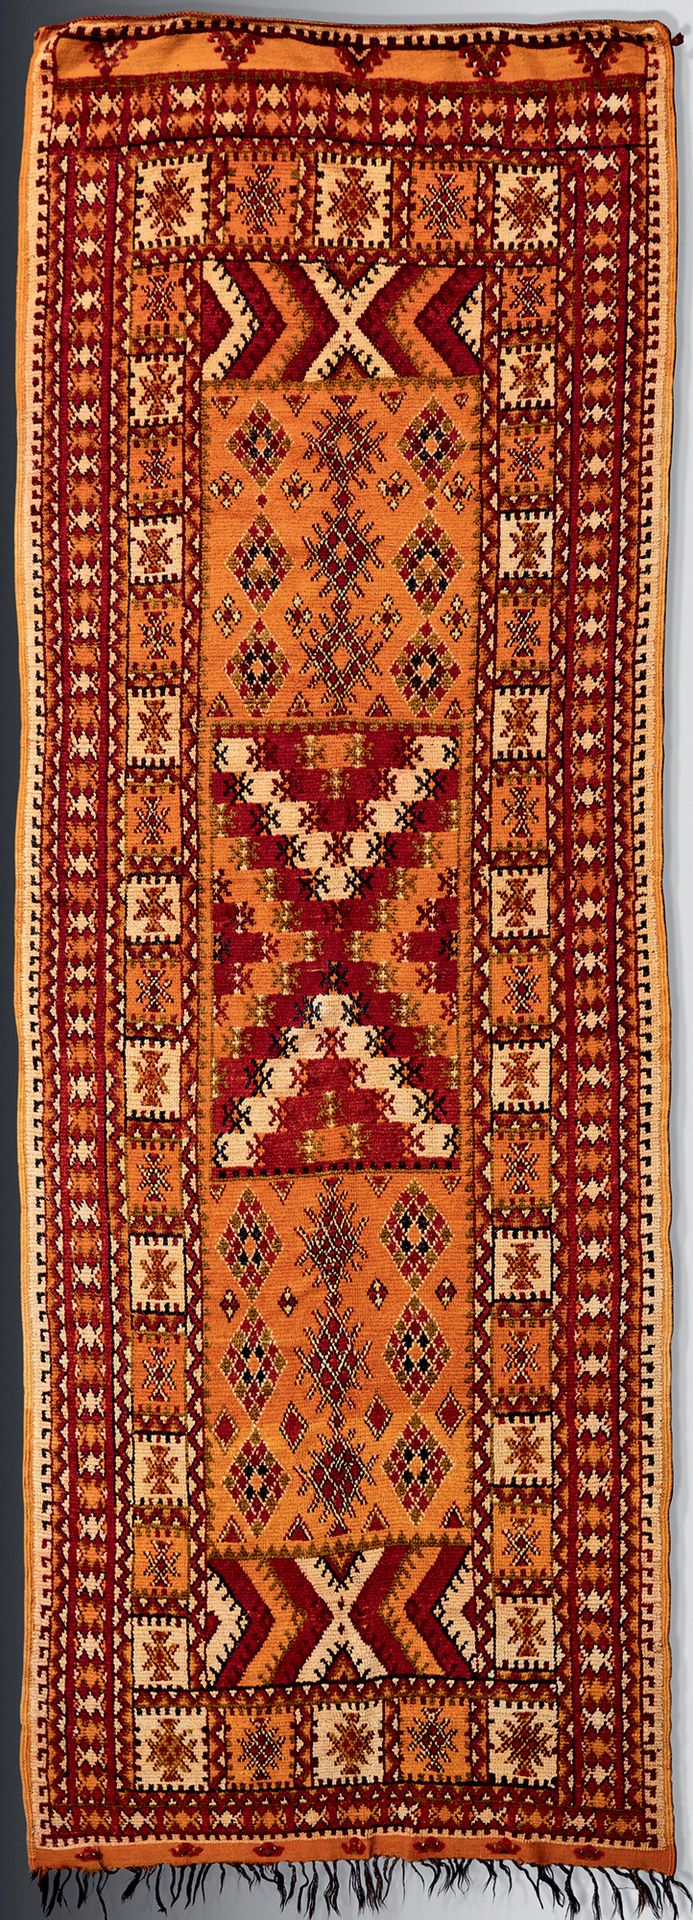 Null Gallery carpet with geometric decoration on an orange background,
20th cent&hellip;